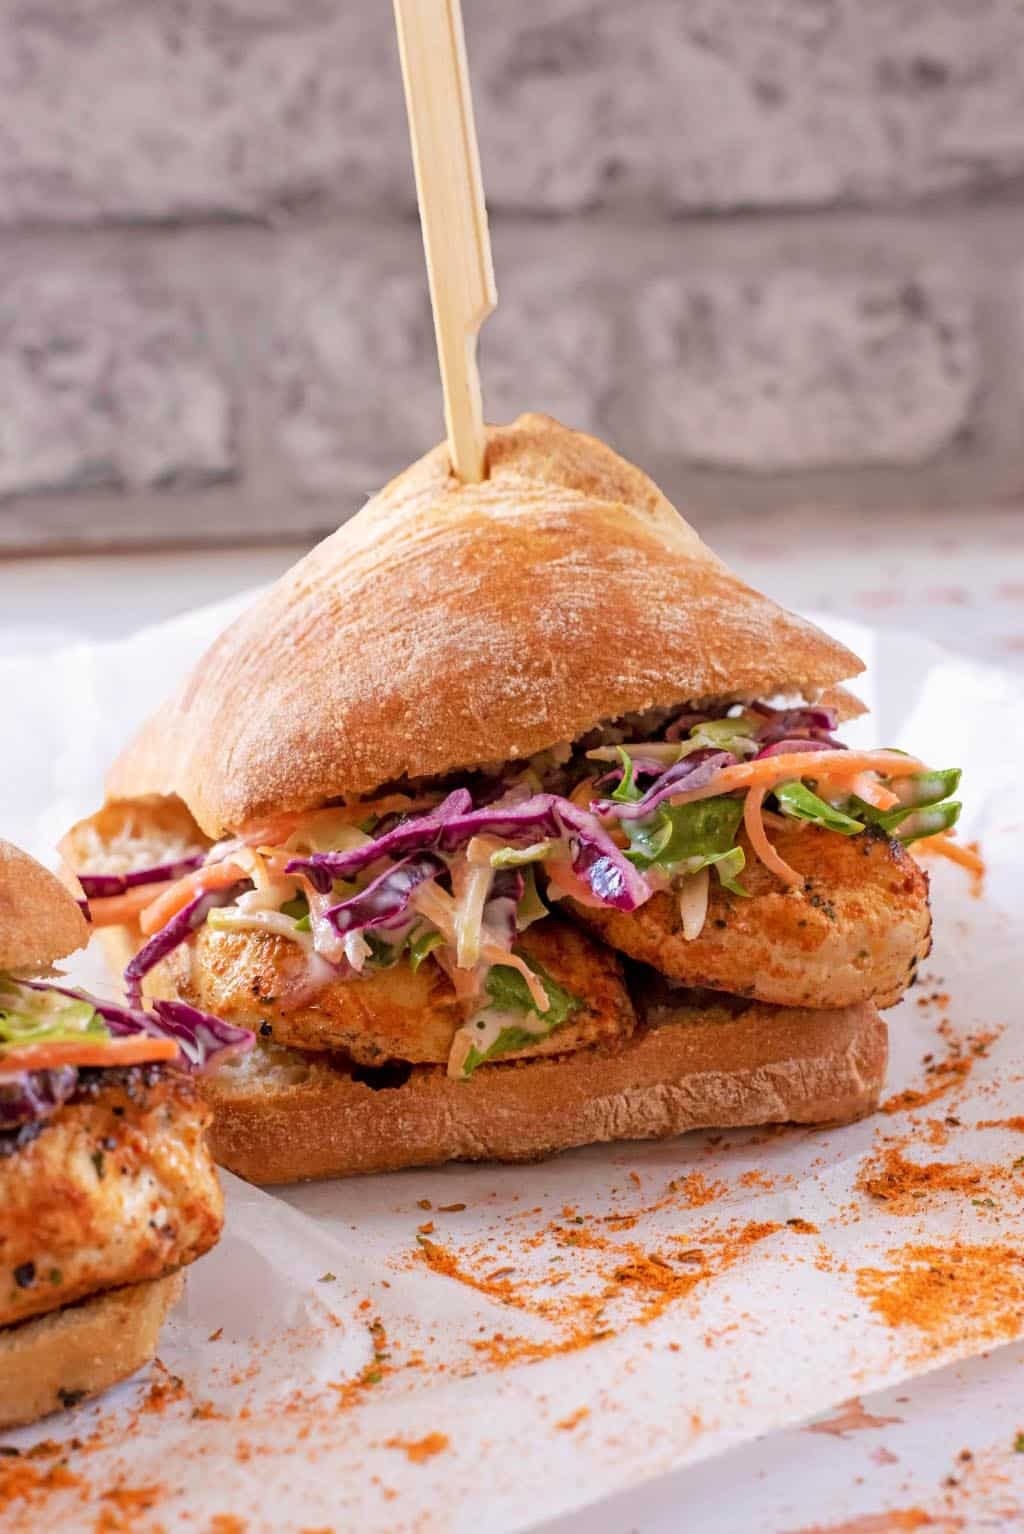 Chicken Burger and slaw in a bun with a wooden skewer through it all.